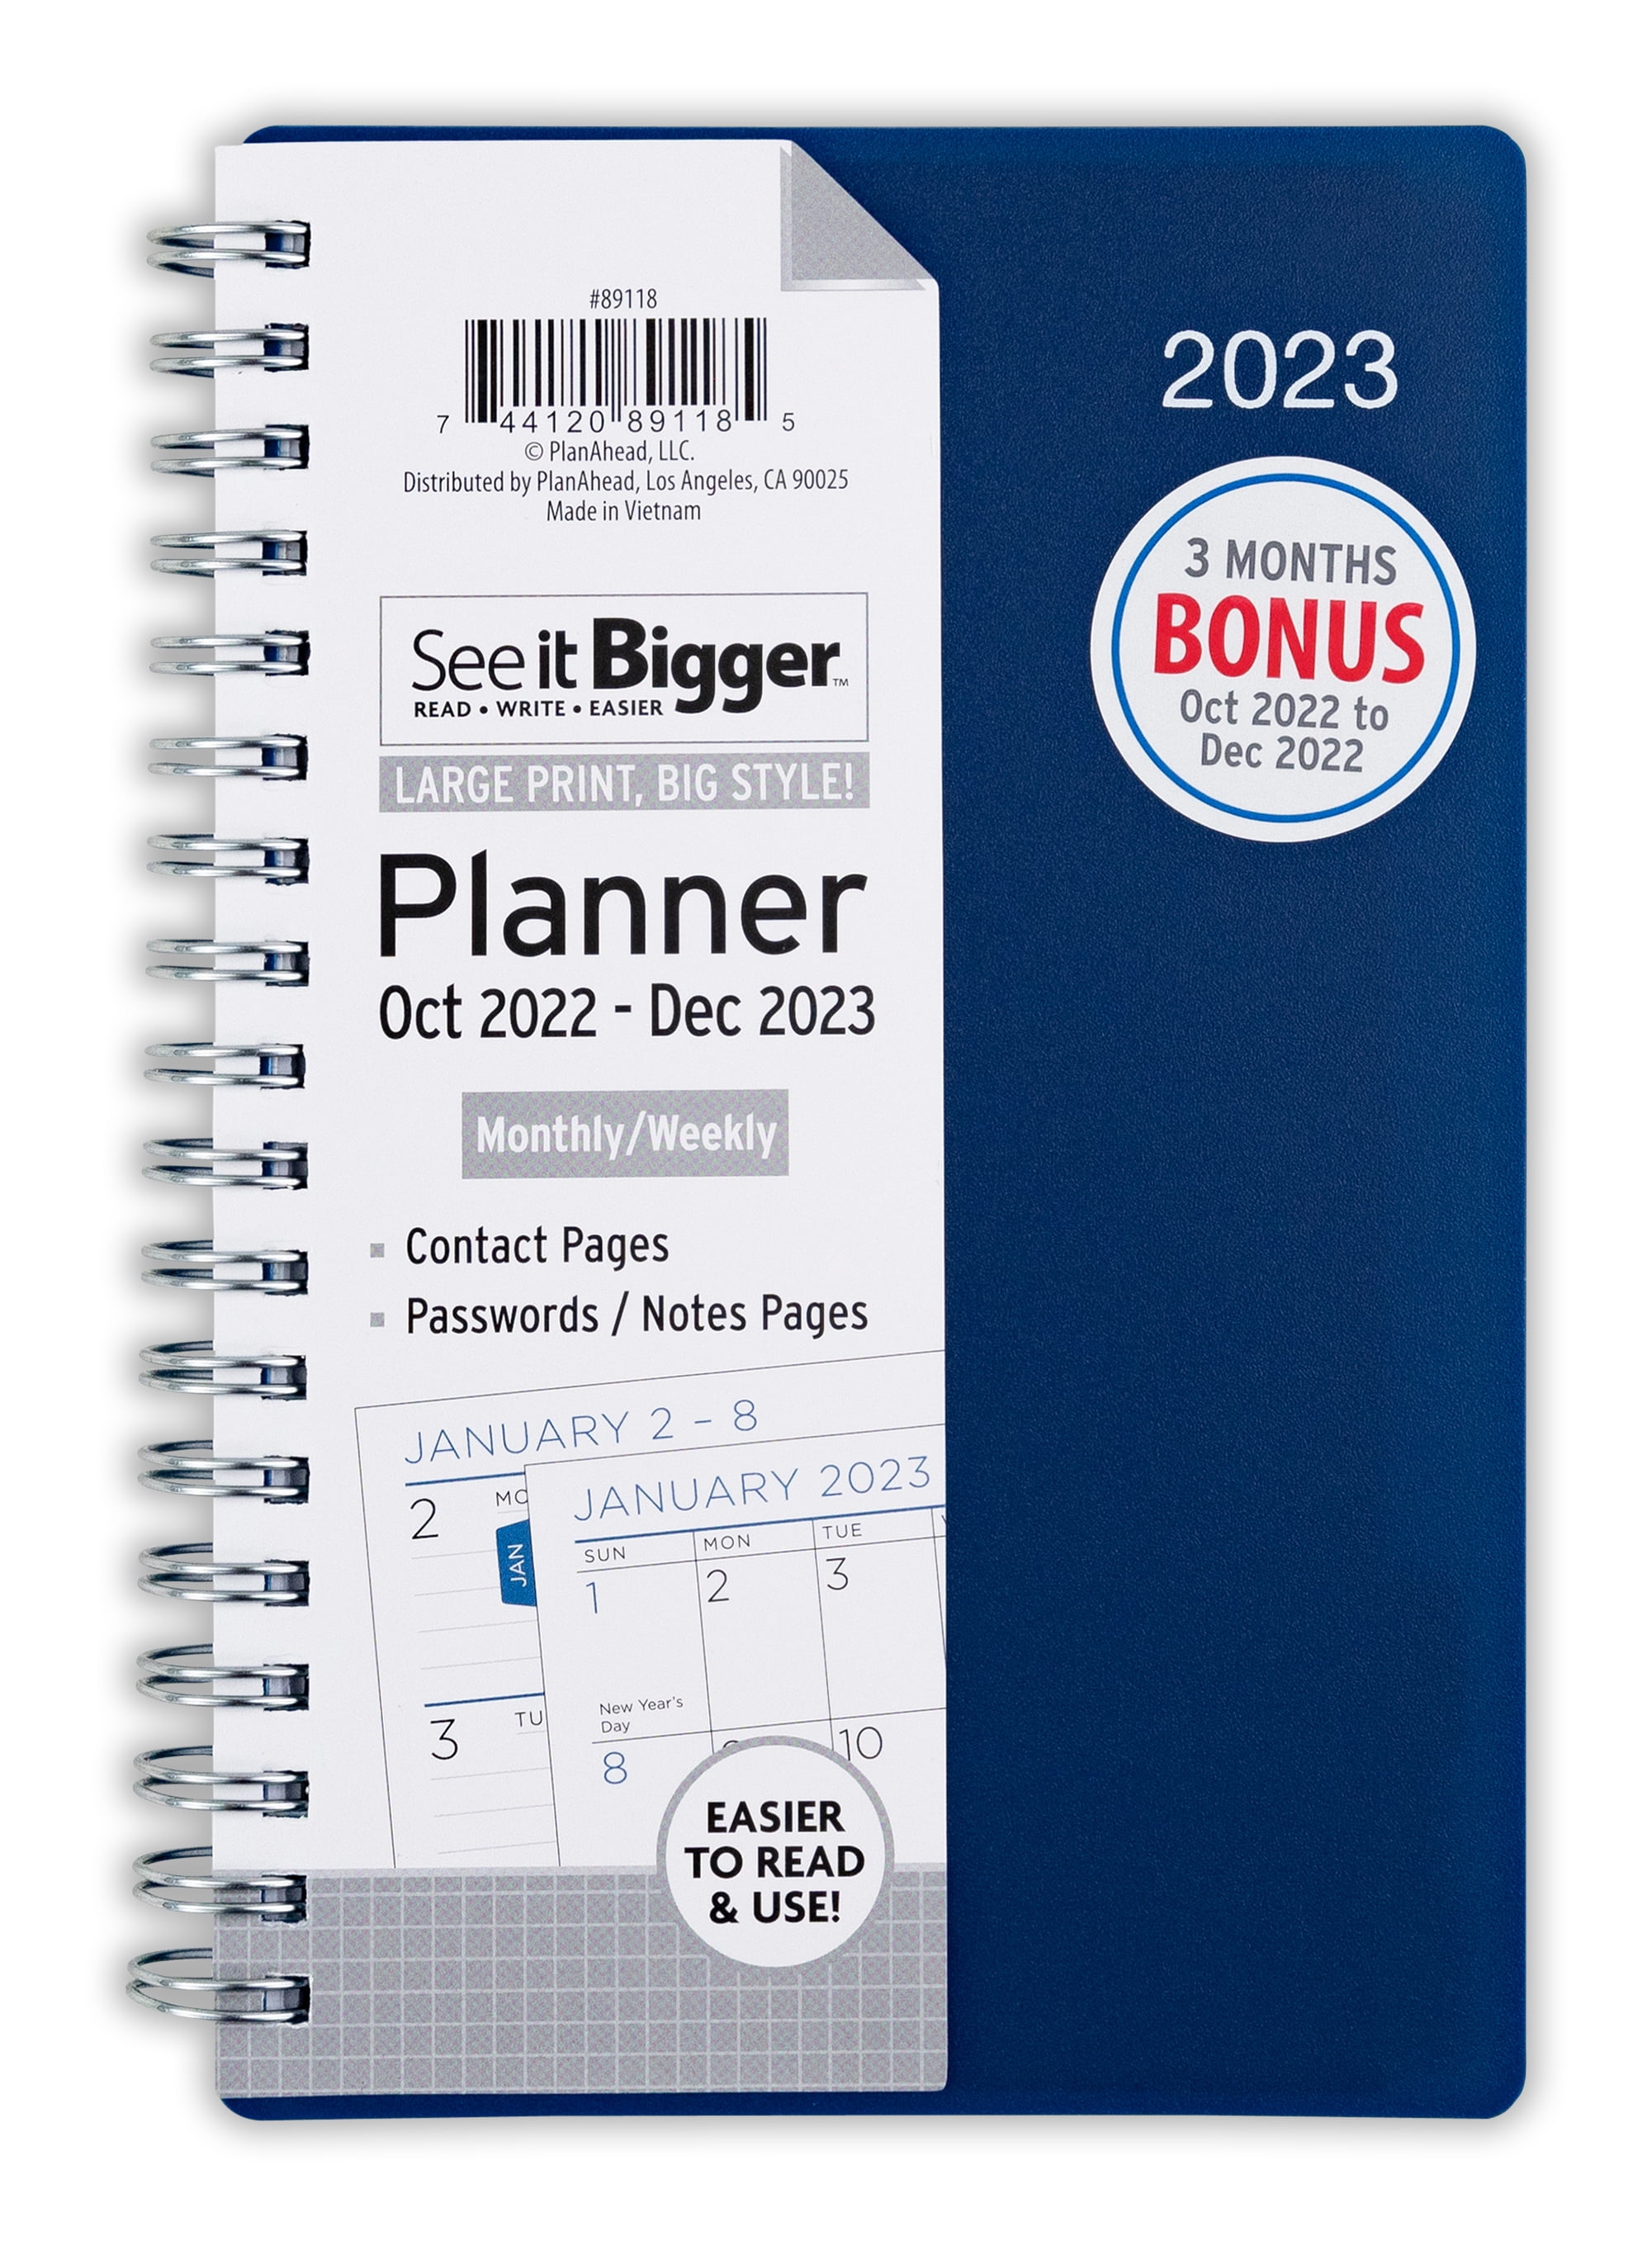 See It Bigger Monthly & Weekly Planner, October 2022 - December 2023 (4.5" x 6.5") Blue